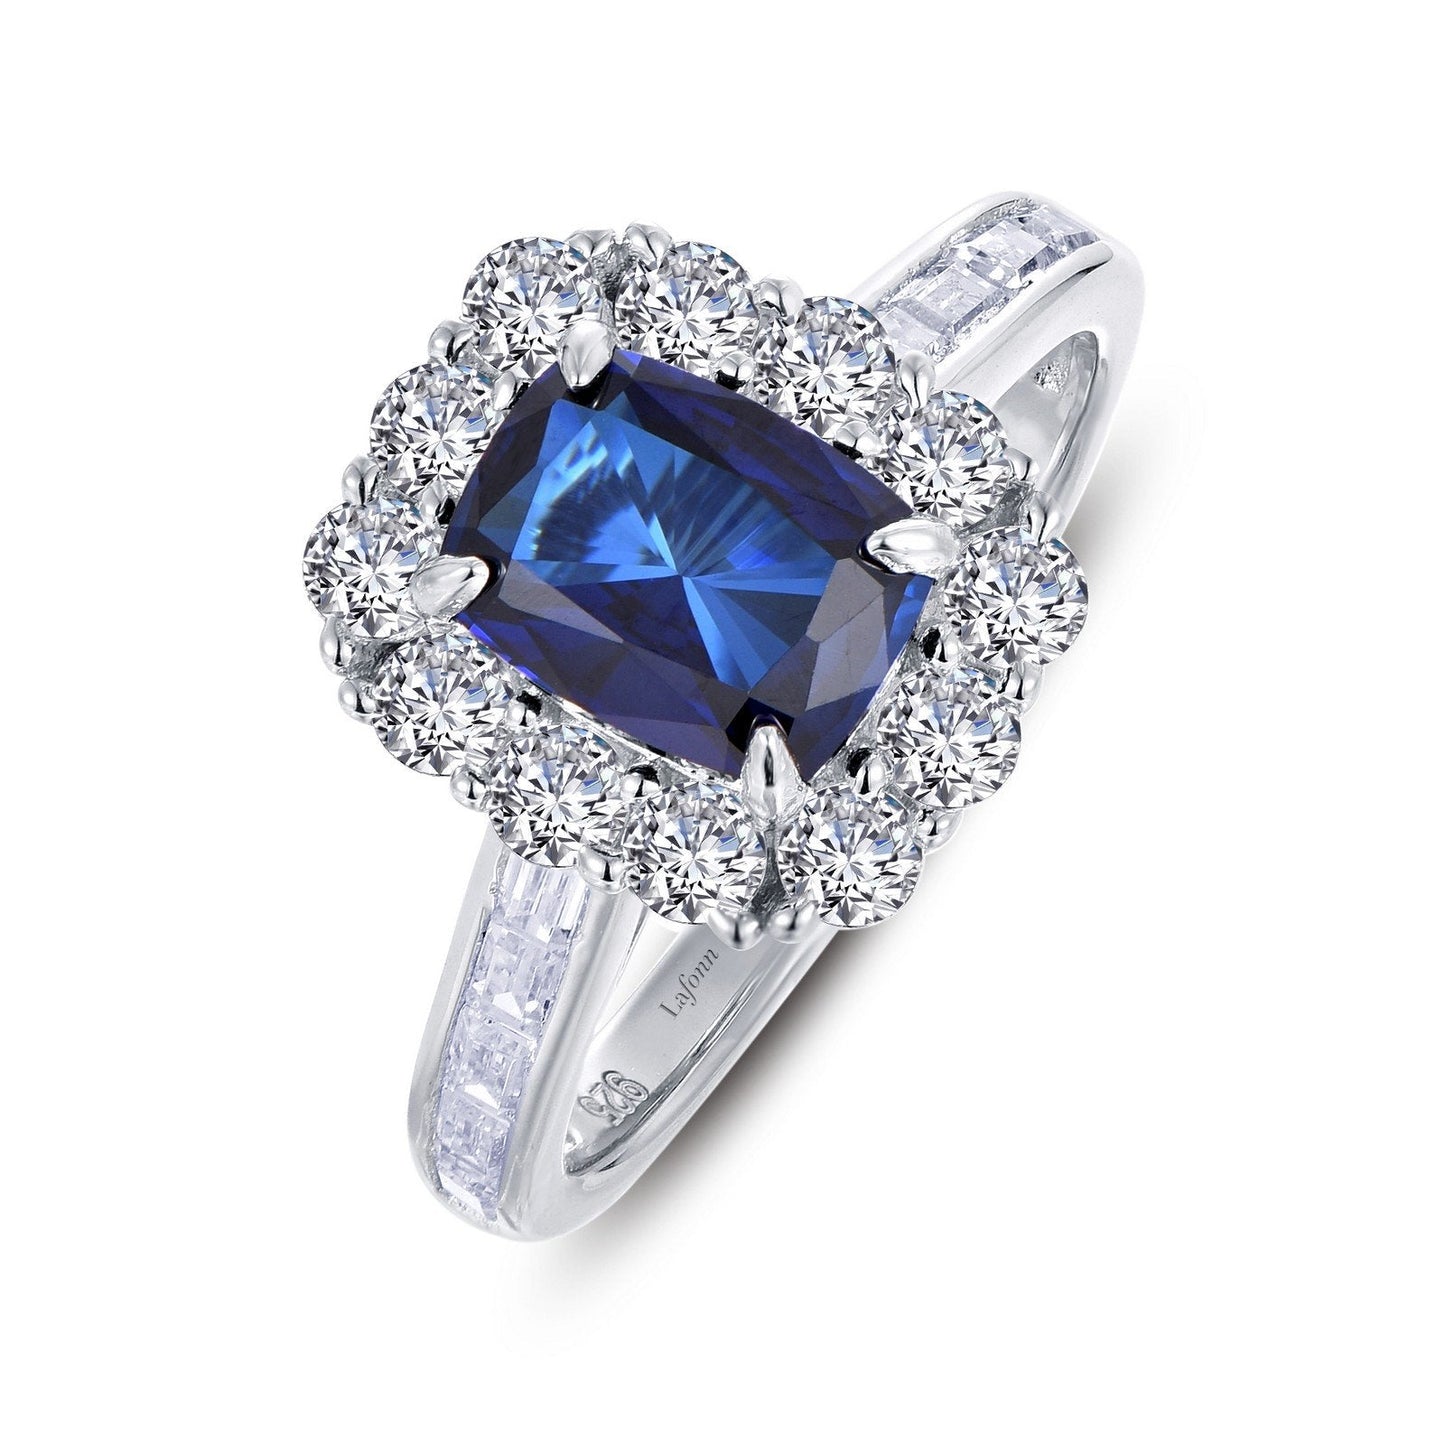 Load image into Gallery viewer, Lafonn Cushion-Cut Halo Engagement Ring Sapphire RINGS Size 10 Platinum 4.06 CTS Approx.10.8(W)
